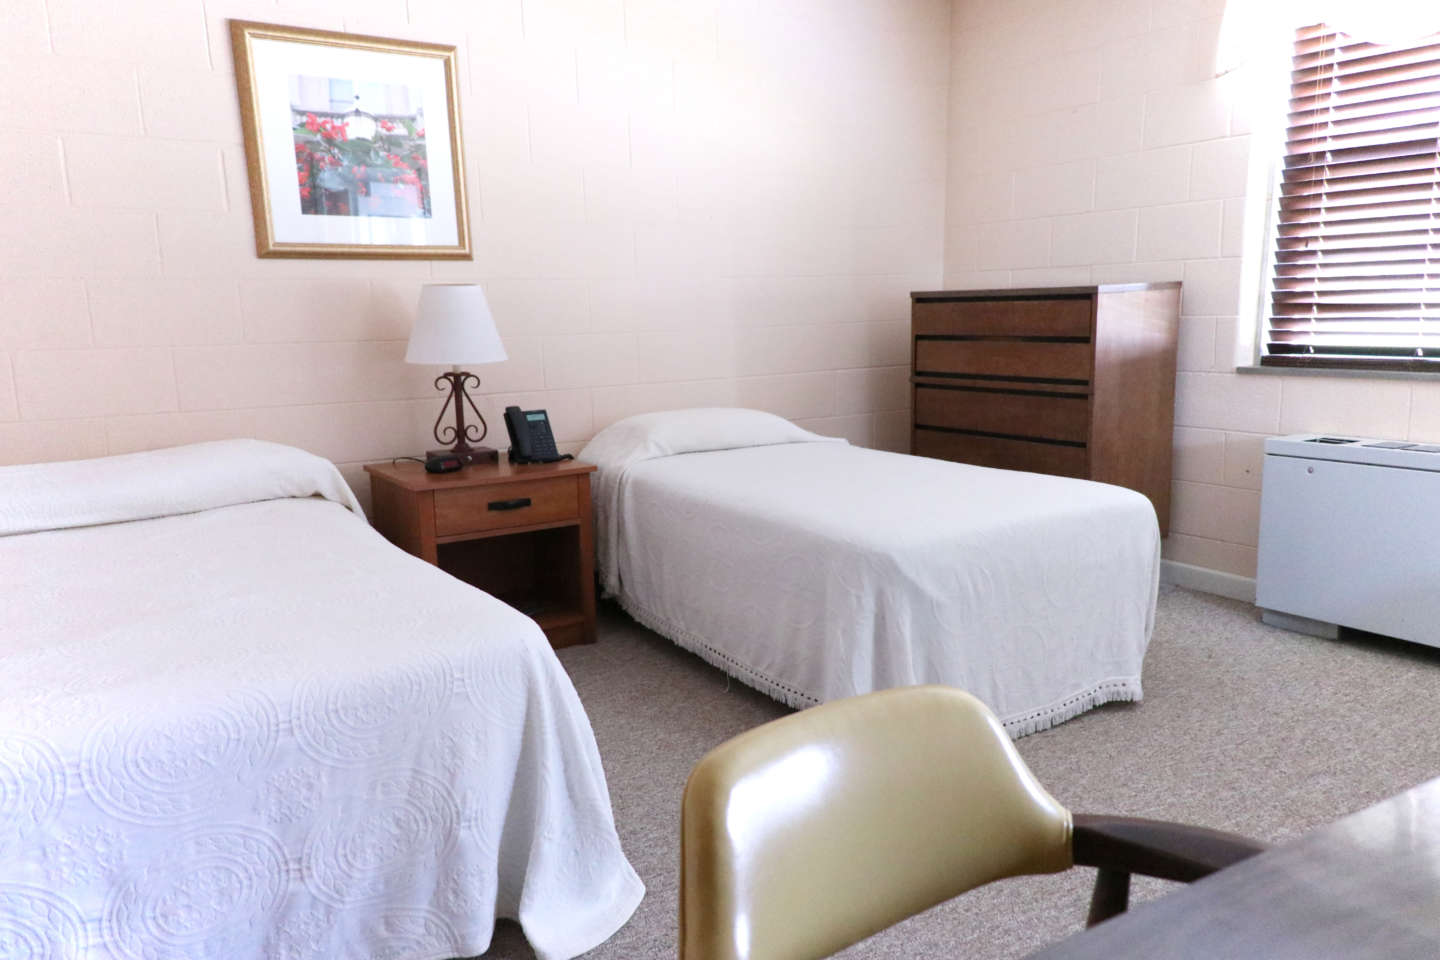 Guest House room with desk and chair accommodations